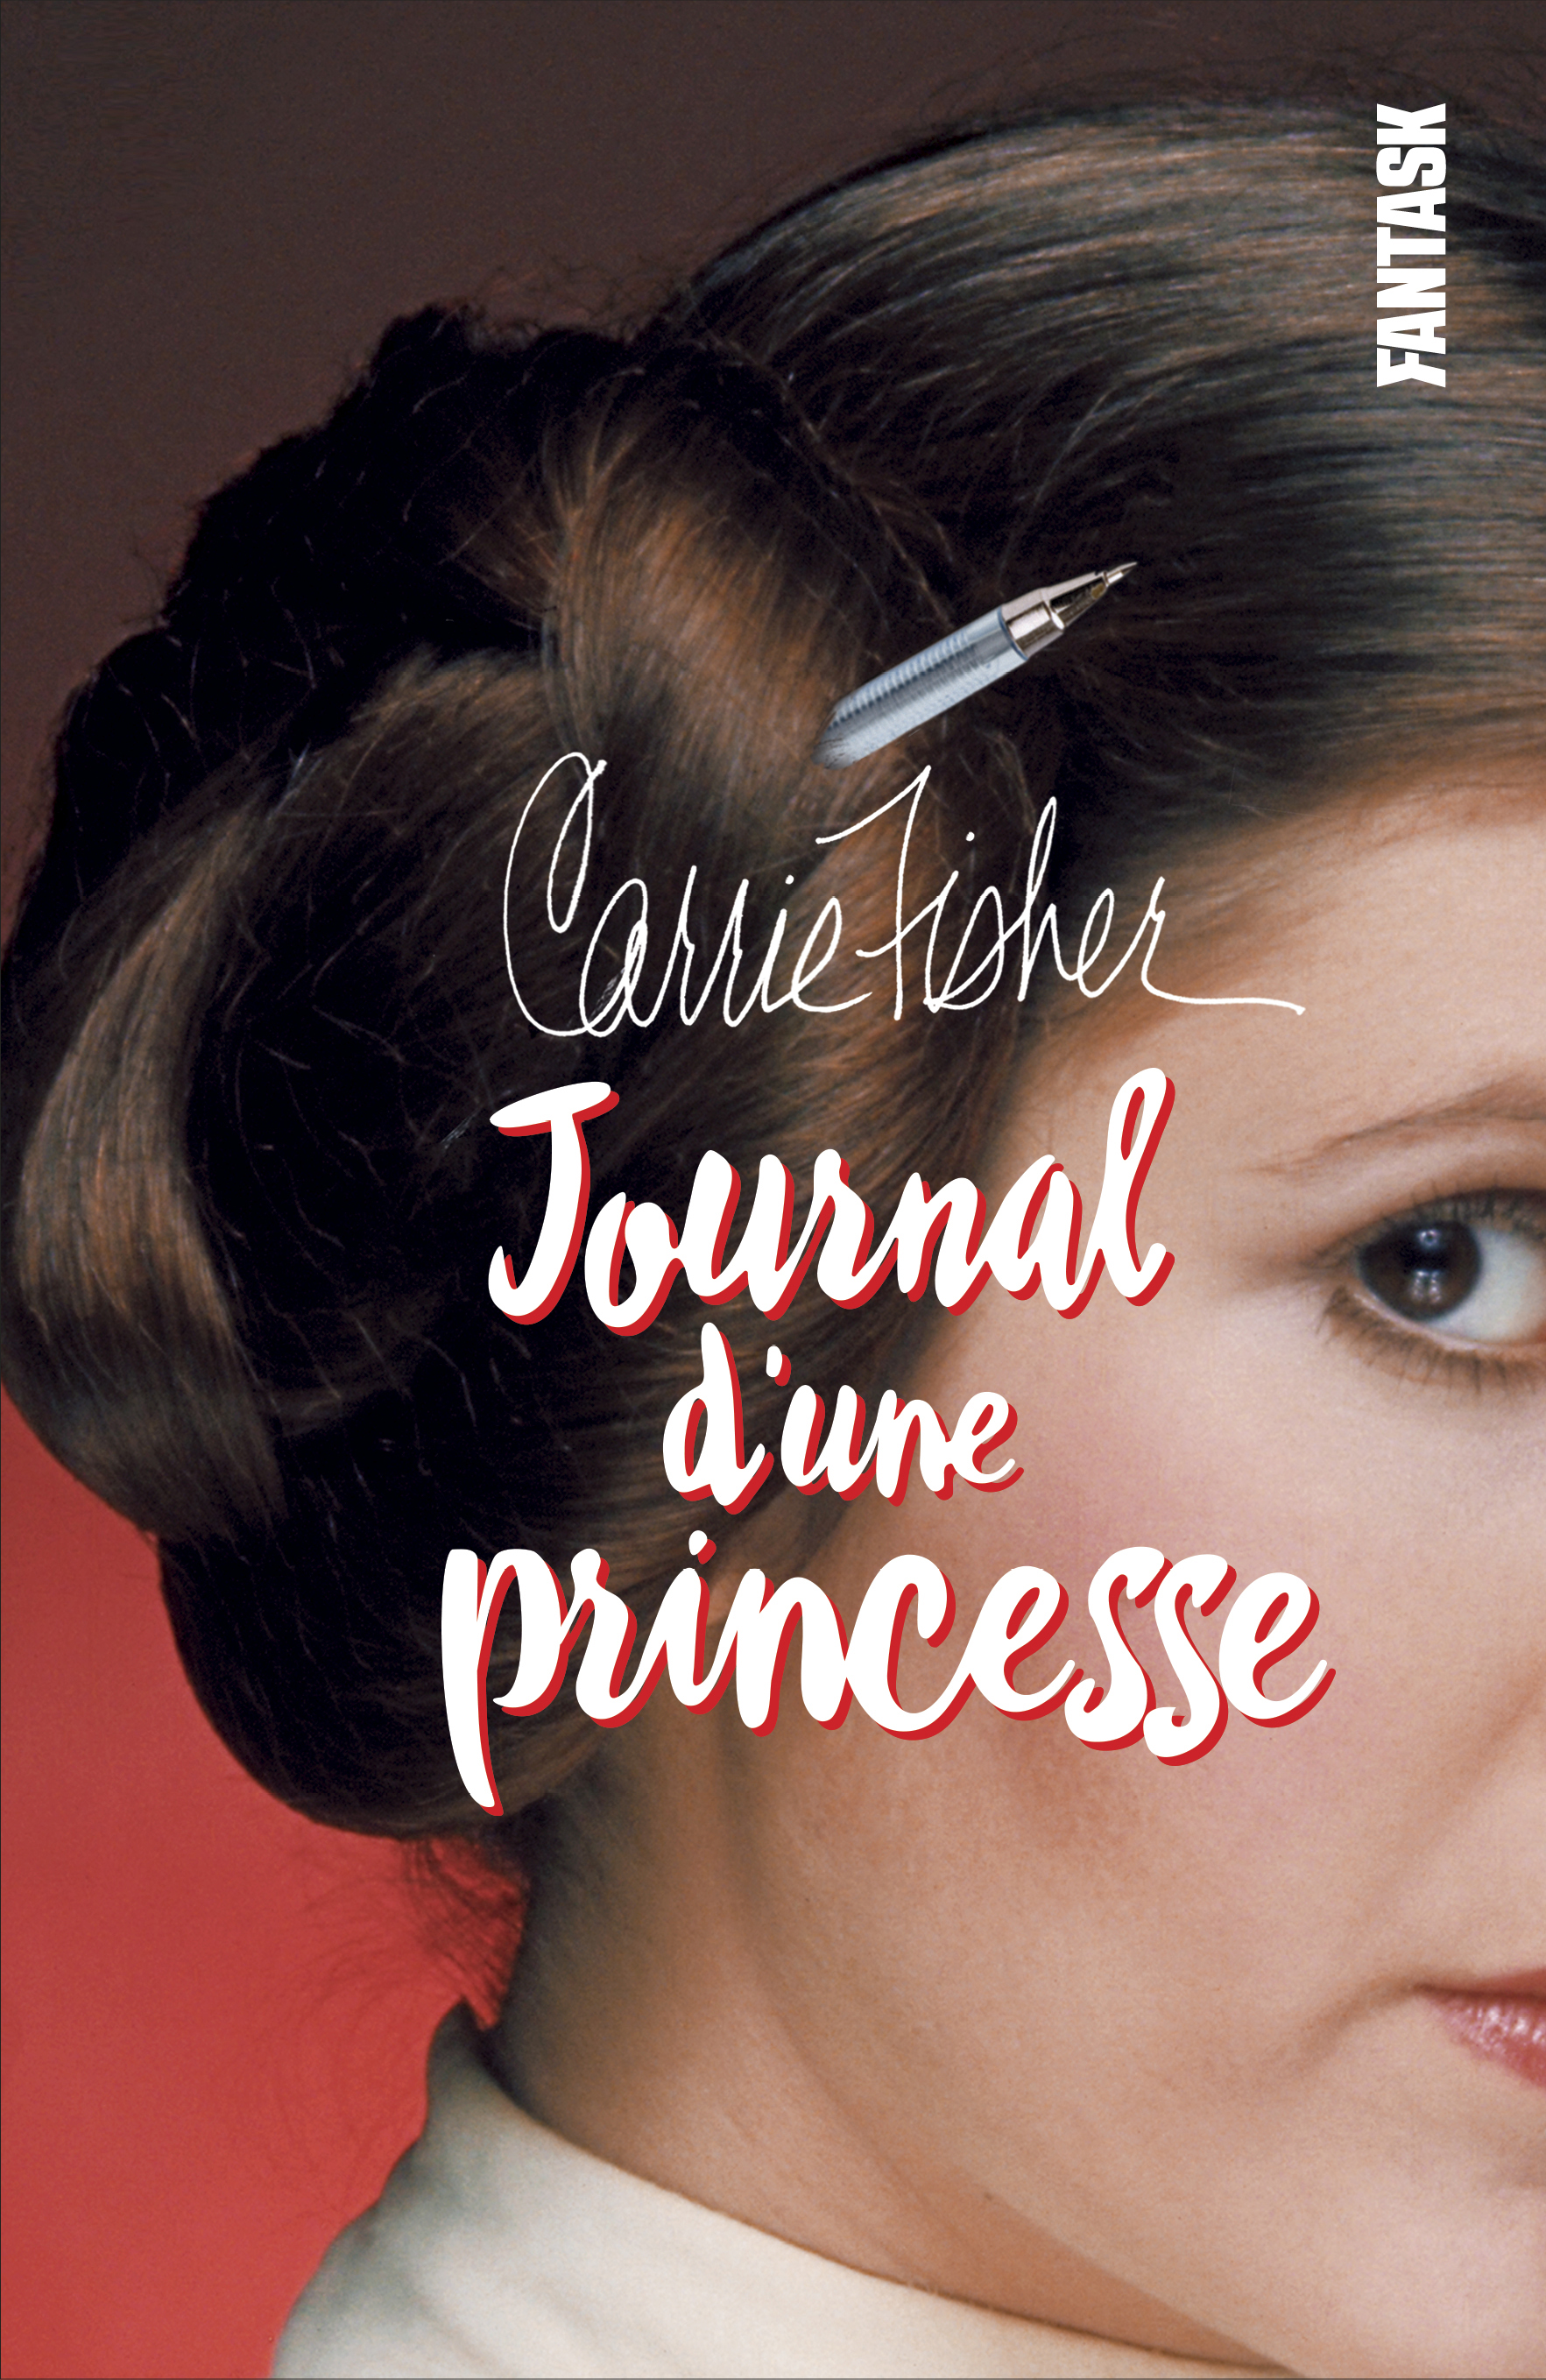 Carrie Fisher, Journal d'une princesse – Carrie Fisher, Journal d'une princesse - couv